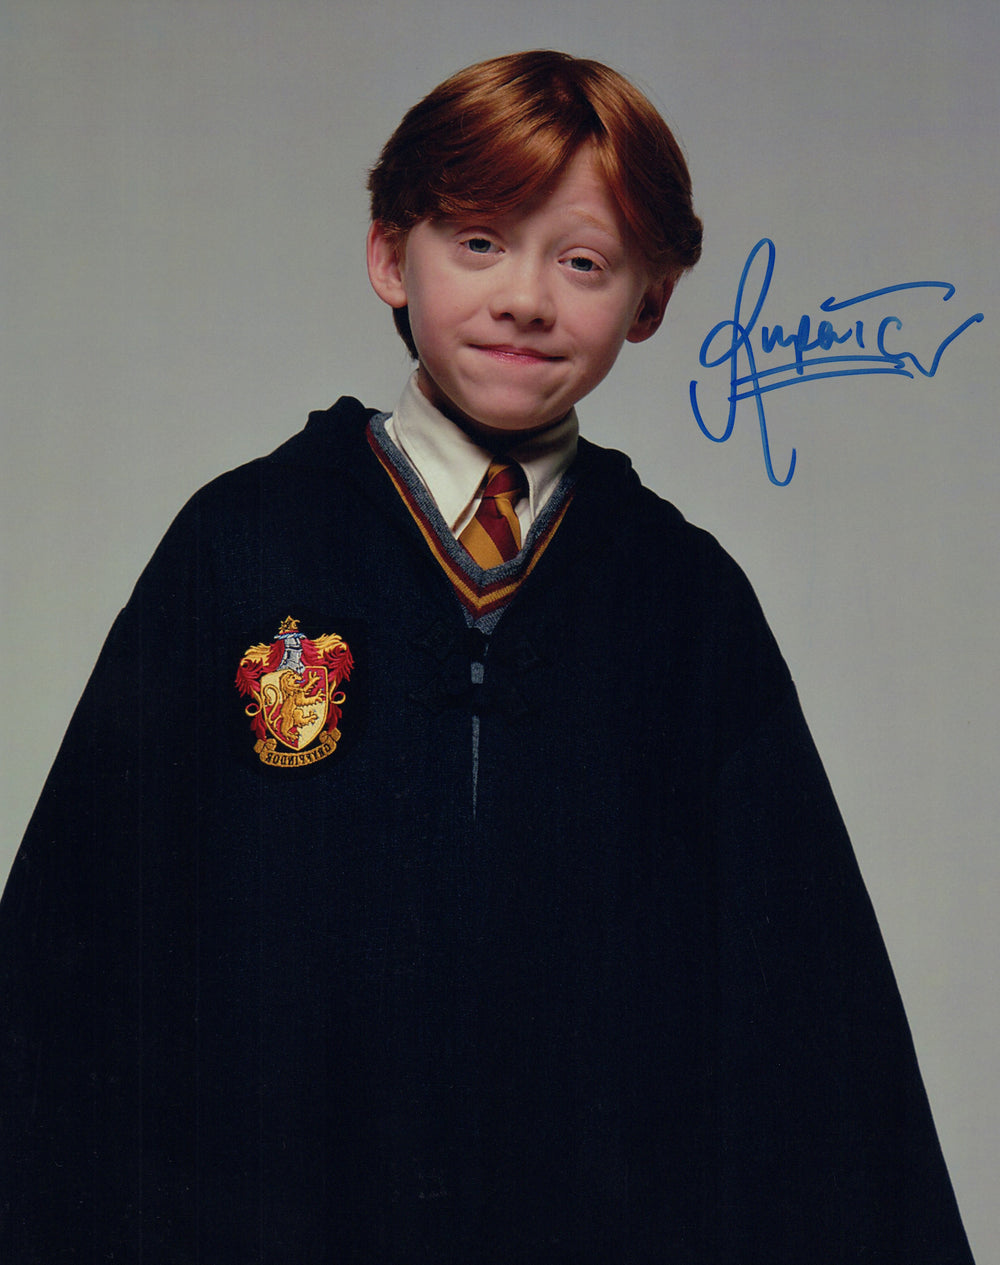 Rupert Grint as Ron Weasley from Harry Potter Signed 11x14 Photo